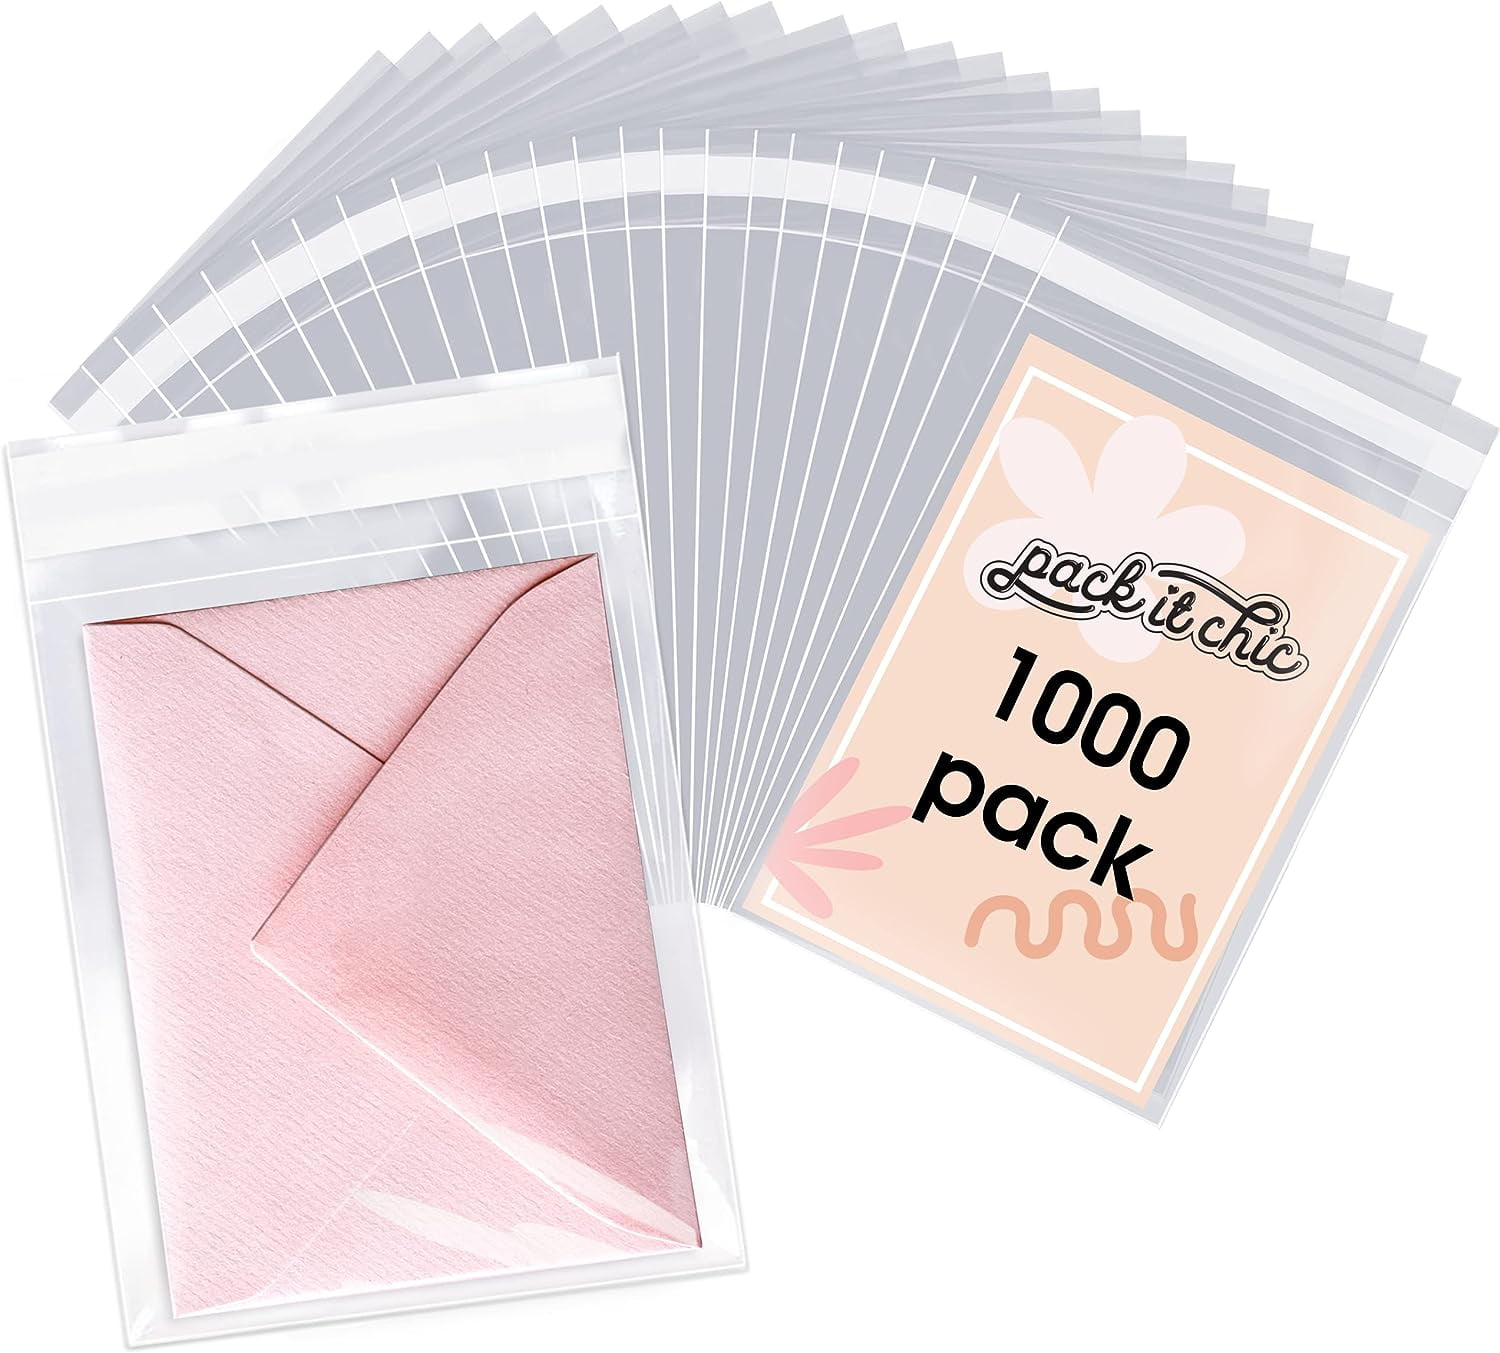 Pack It Chic - 4” x 6” (1000 Pack) Clear Resealable Polypropylene Bags - Fits 4x6 Prints Photos A1 Cards Envelopes - Self Seal